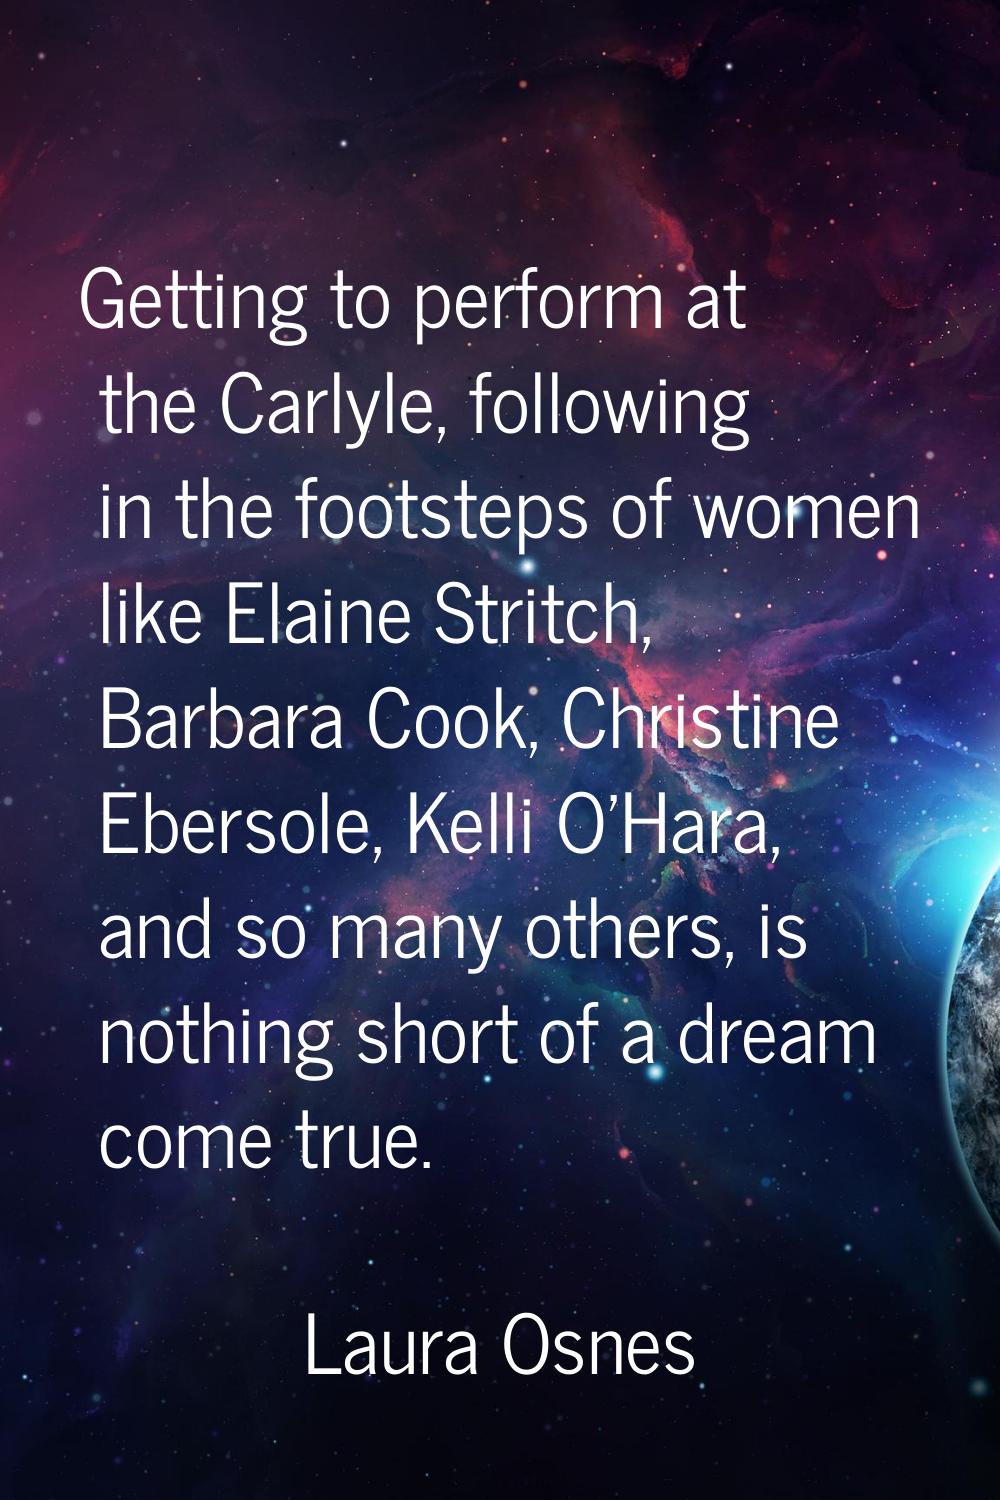 Getting to perform at the Carlyle, following in the footsteps of women like Elaine Stritch, Barbara